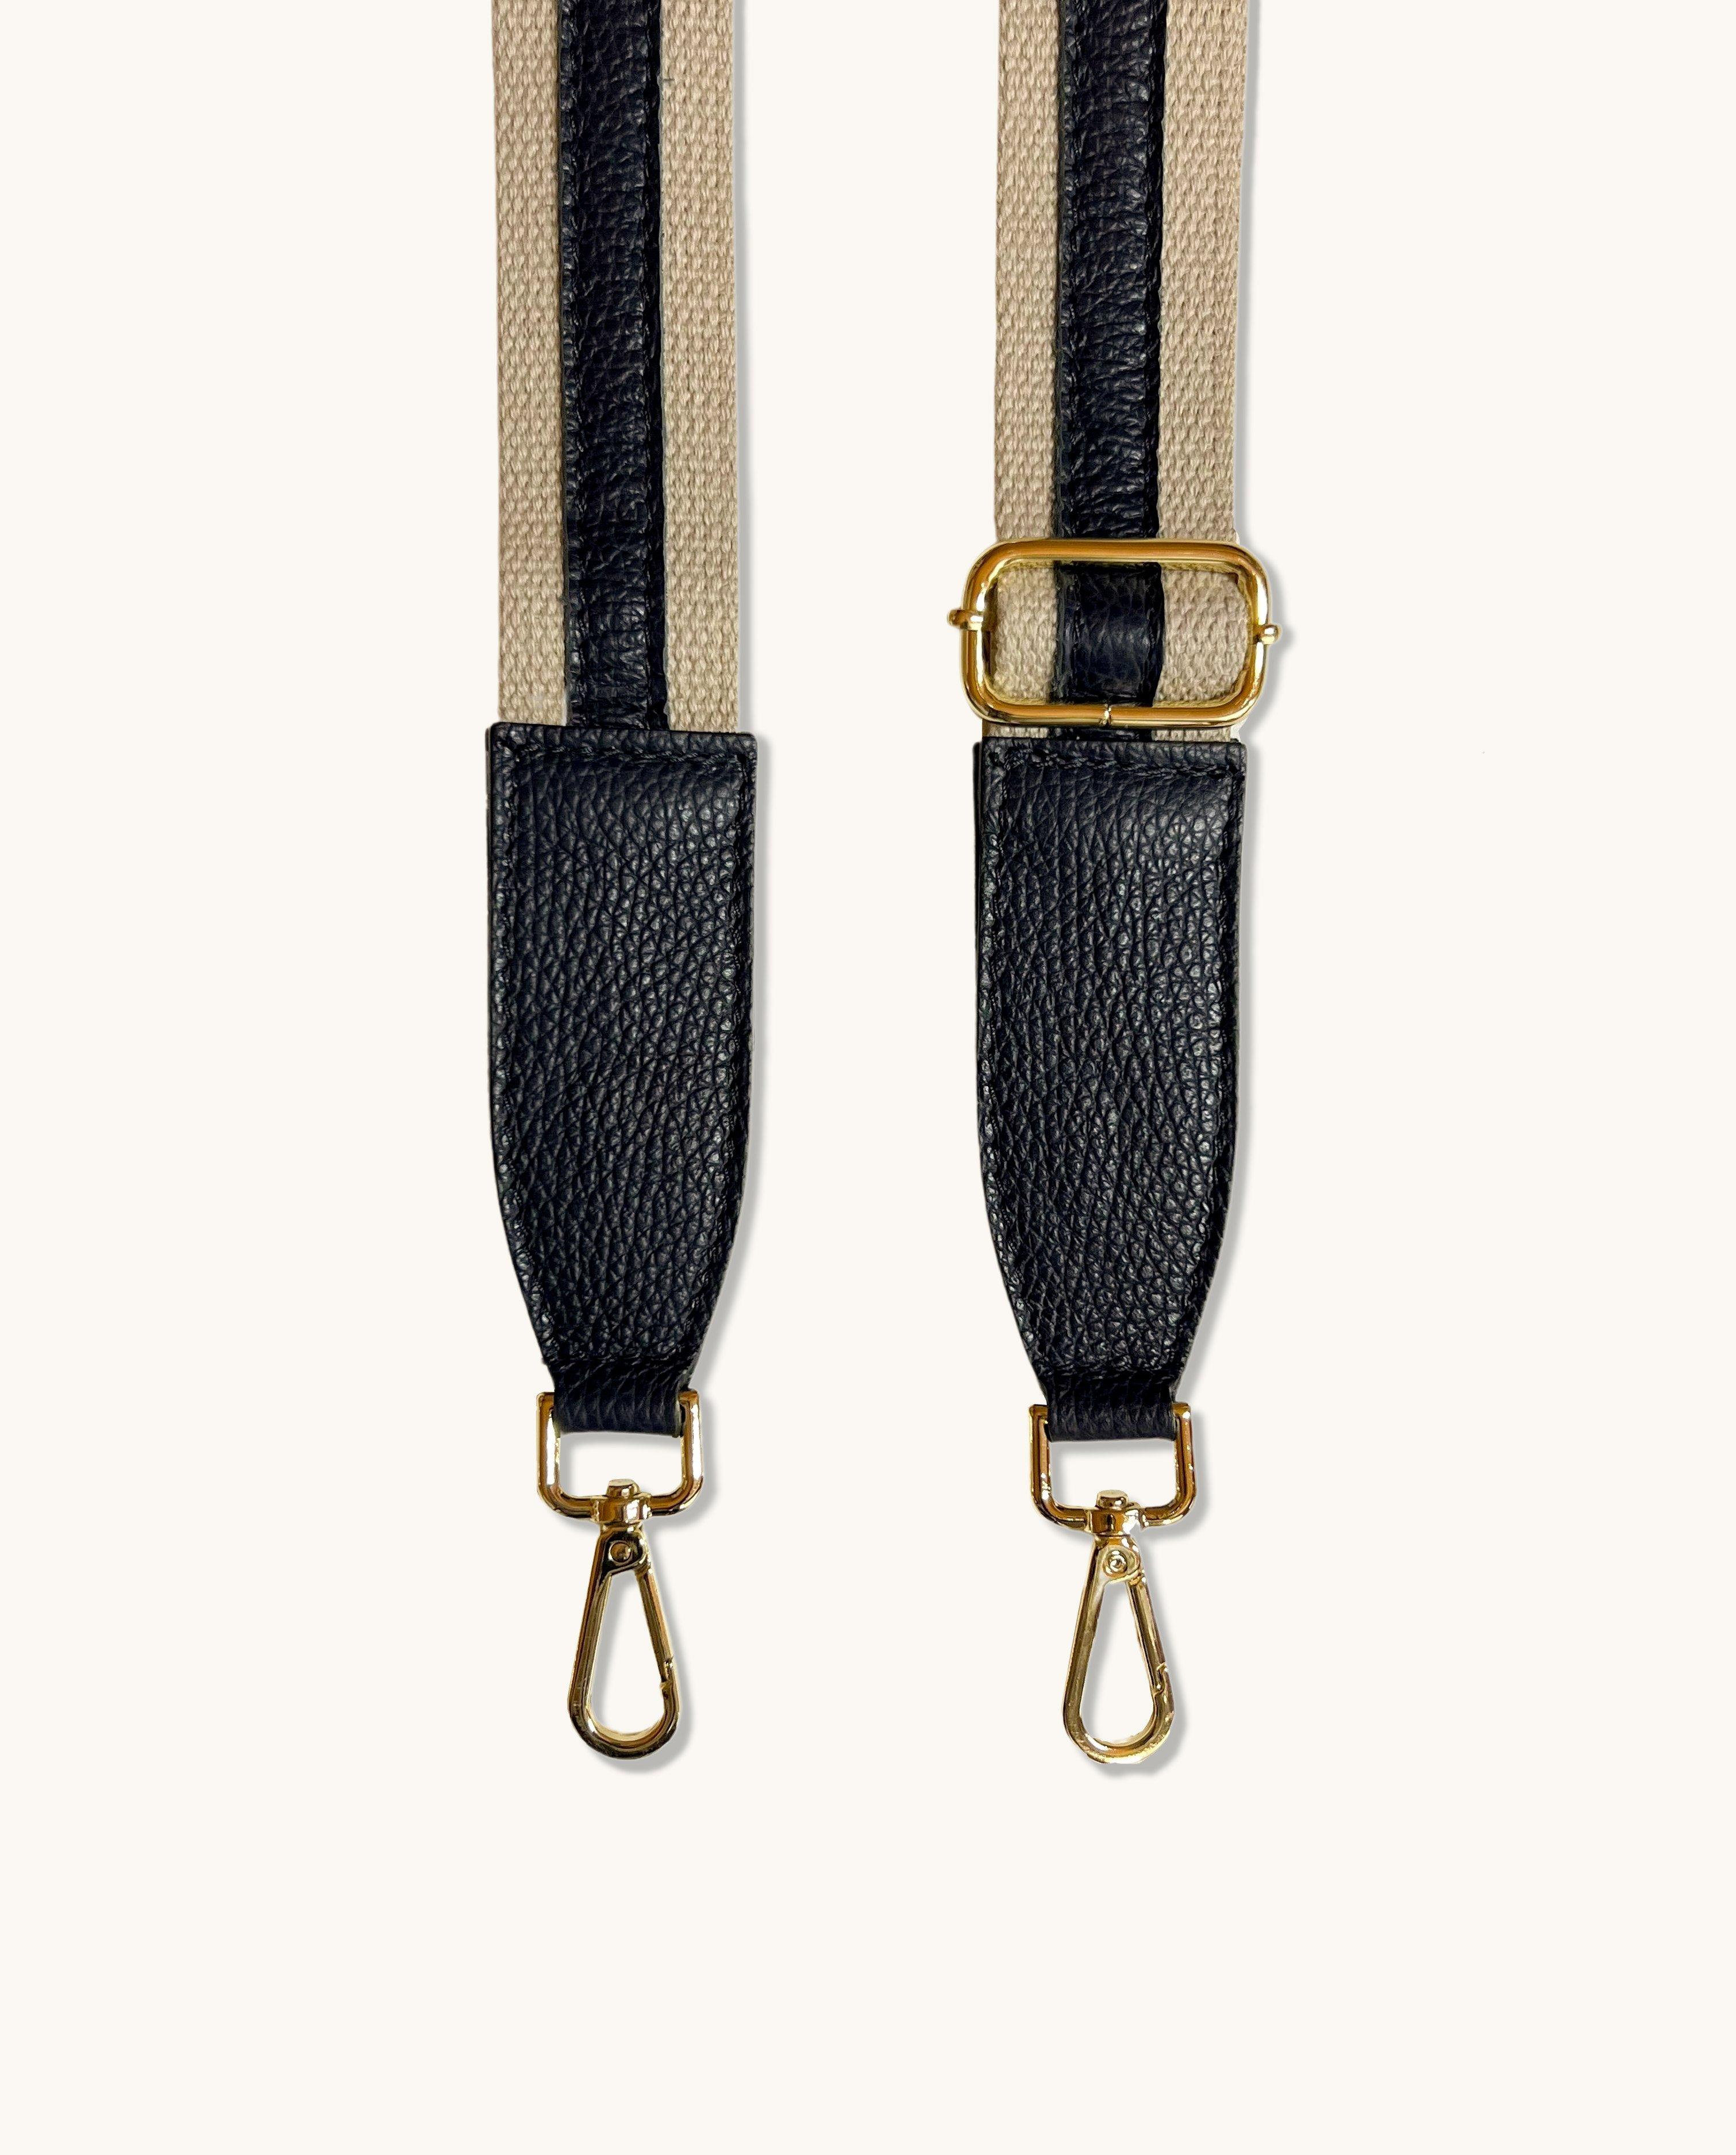 The Bloxsome Black Leather Crossbody Bag With Gold Chain Strap